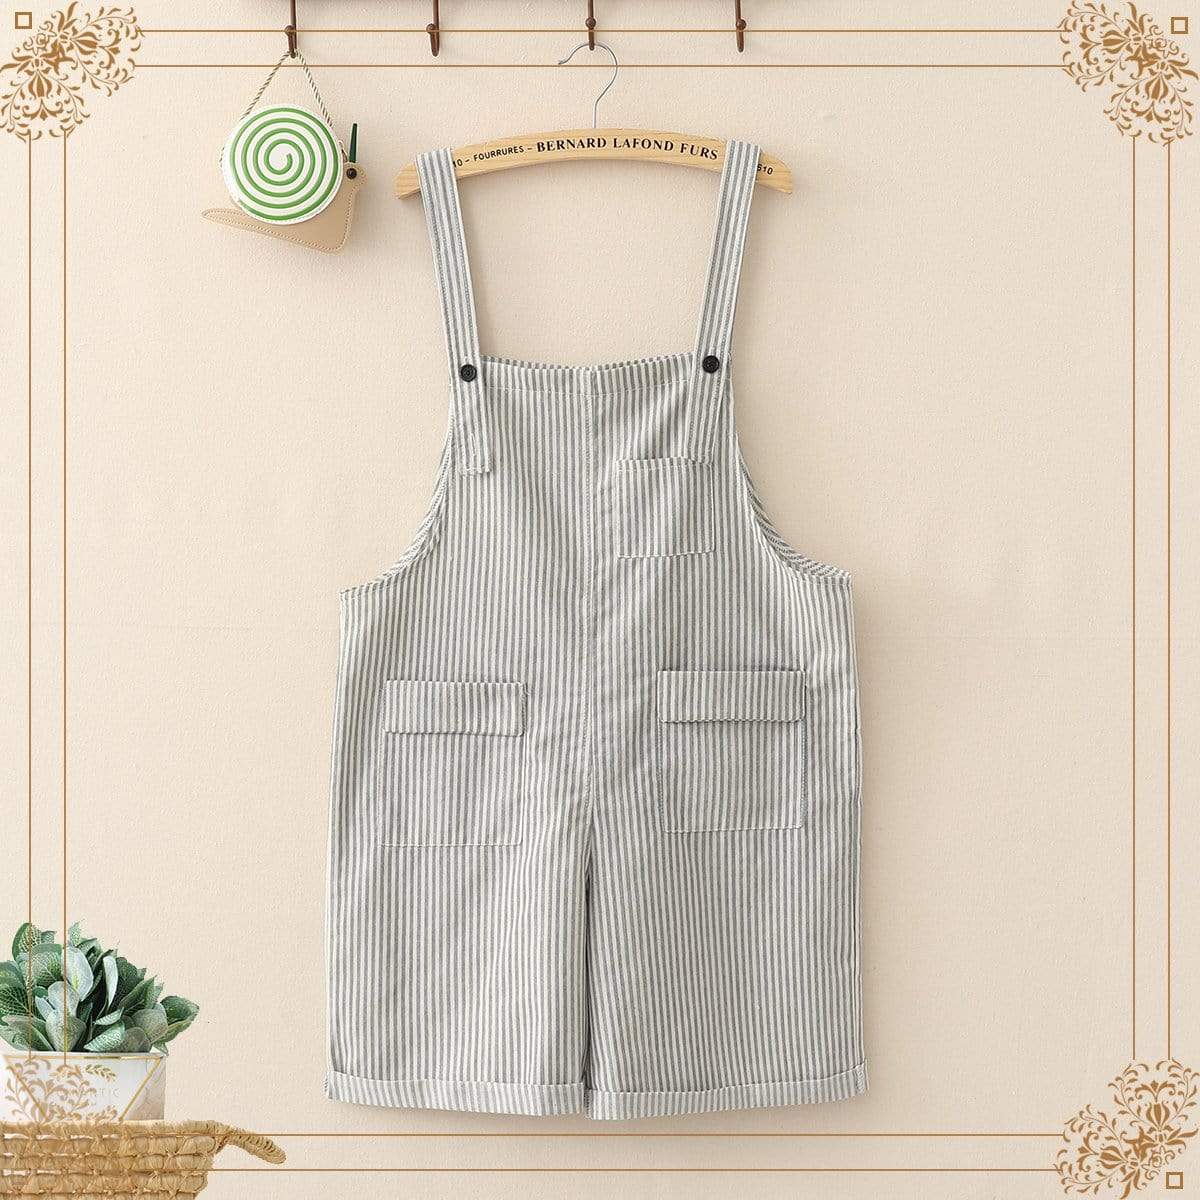 Kawaiifashion One Size Women's Casual Contrast Color Striped Overalls